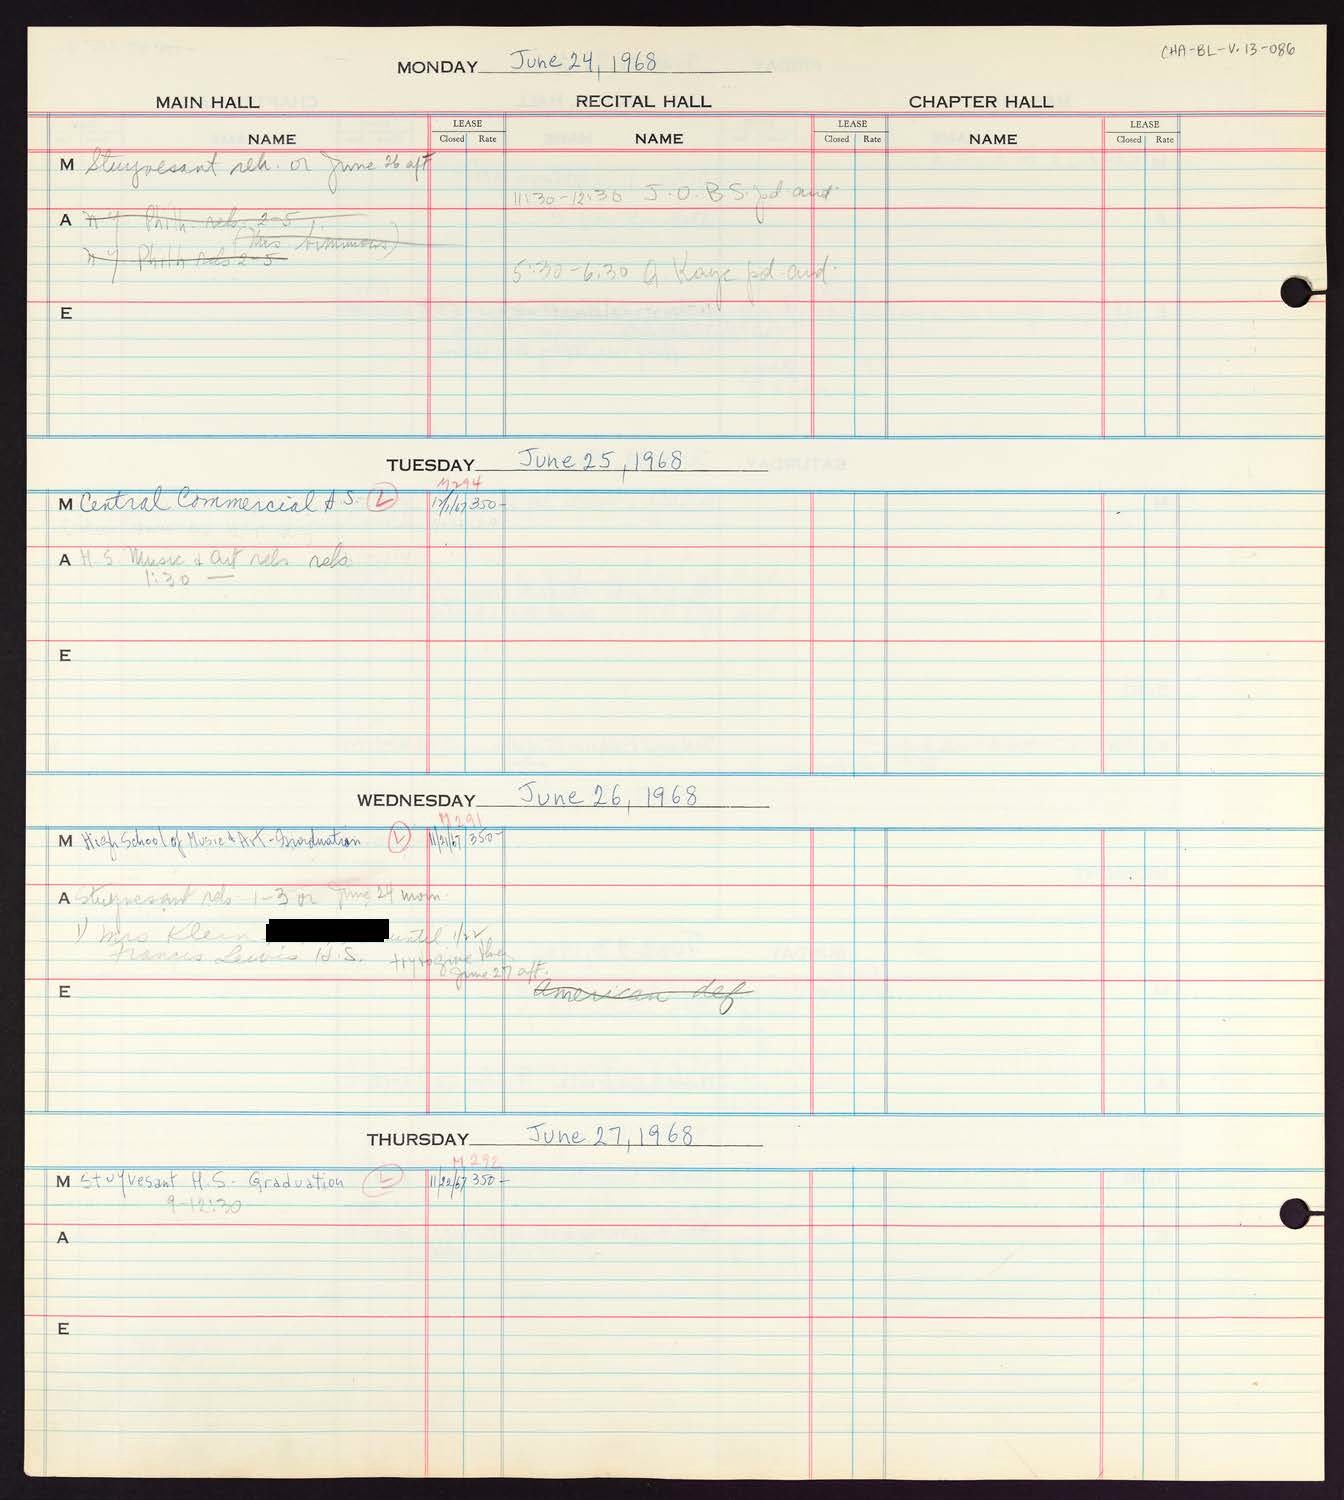 Carnegie Hall Booking Ledger, volume 13, page 86